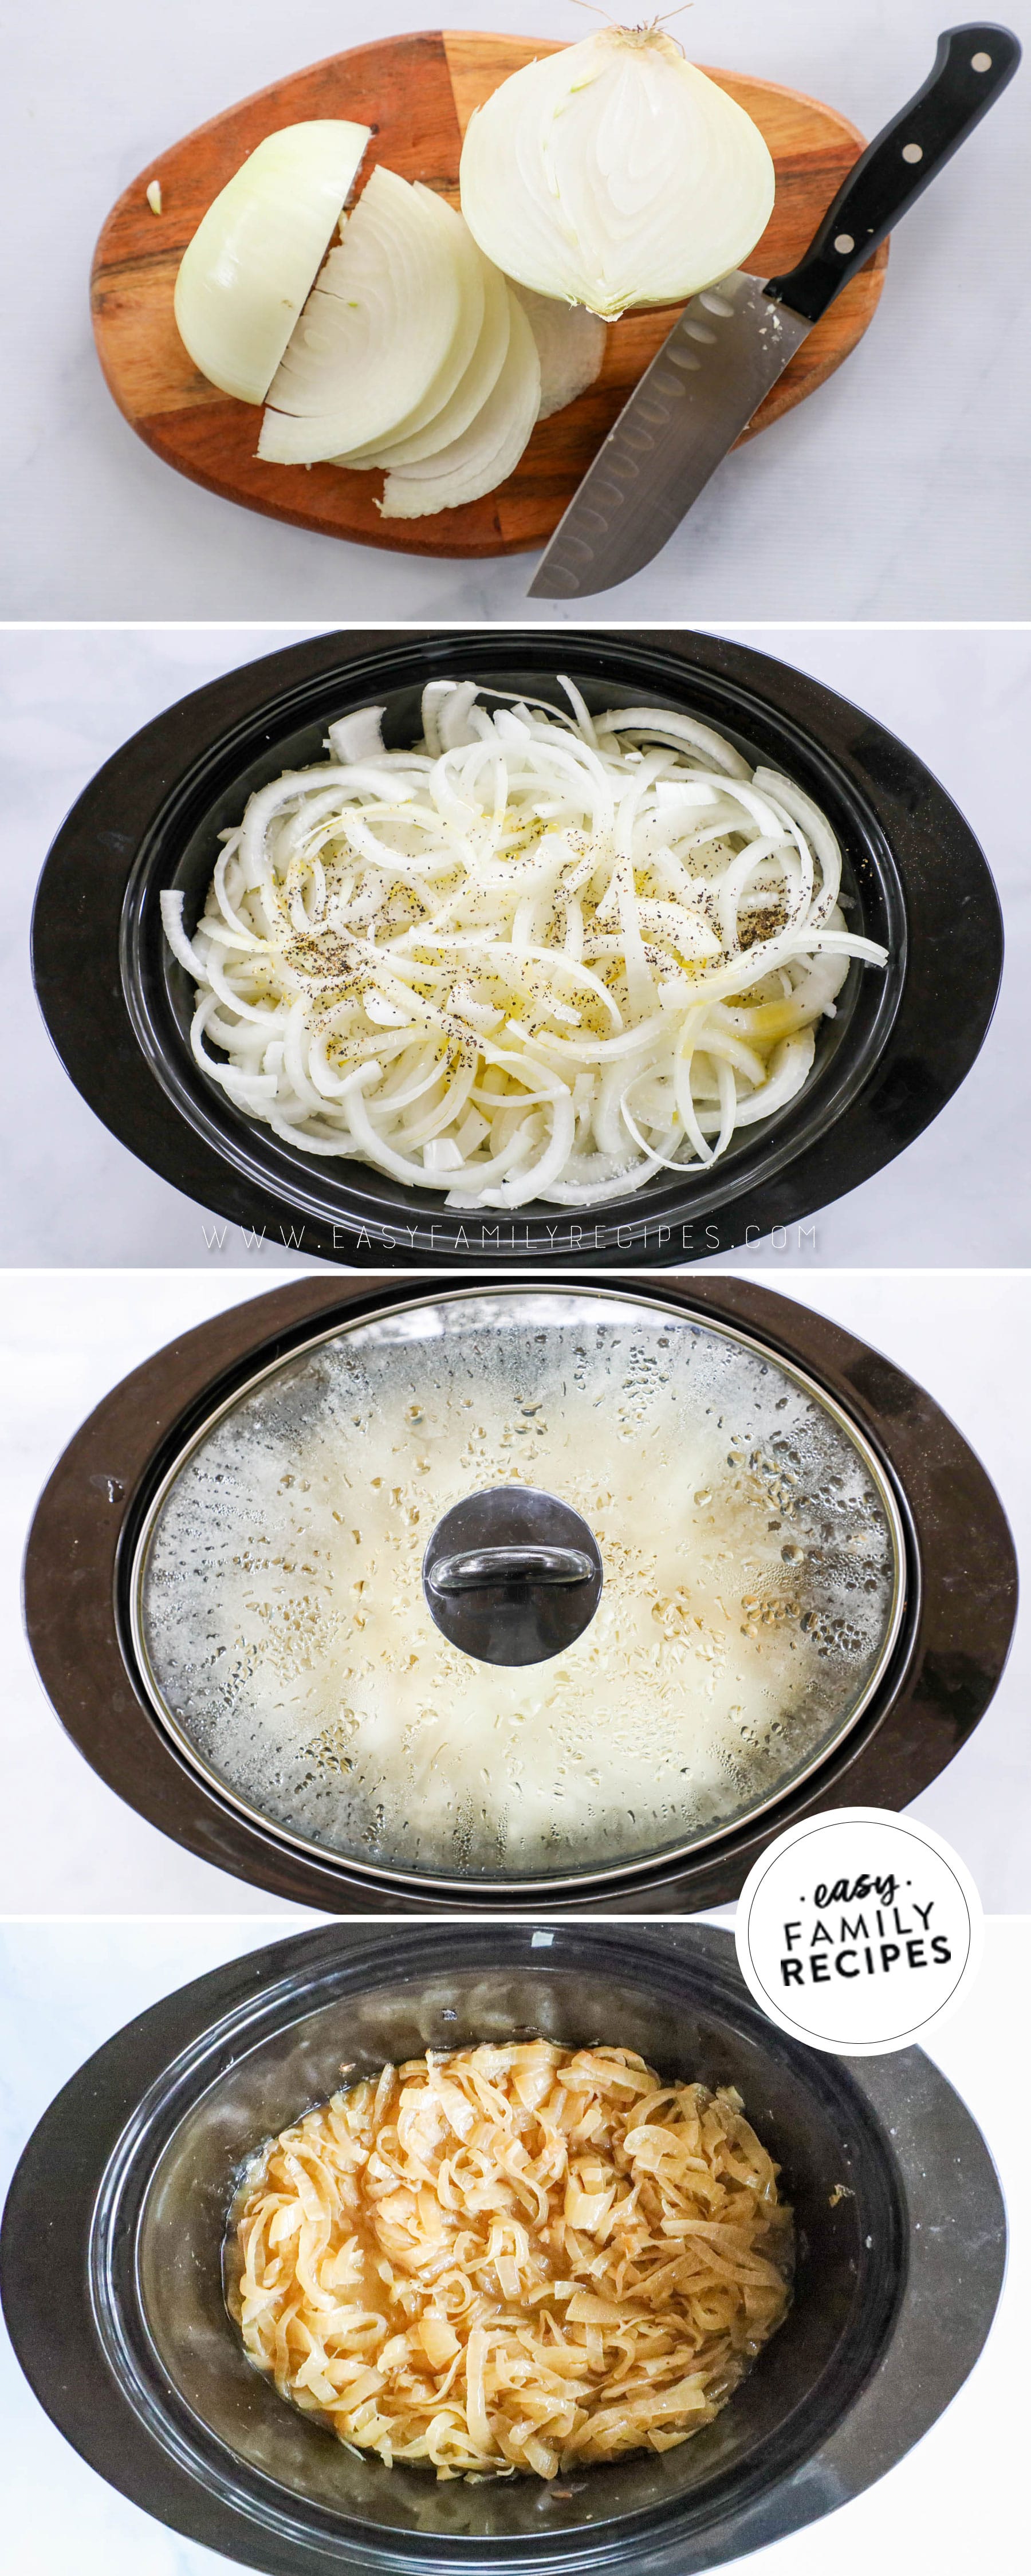 how to make easy Crock Pot caramelized onions 1)slice onions 2)add onions to slow cooker with seasonings 3)cover 4)cook on low until caramelized